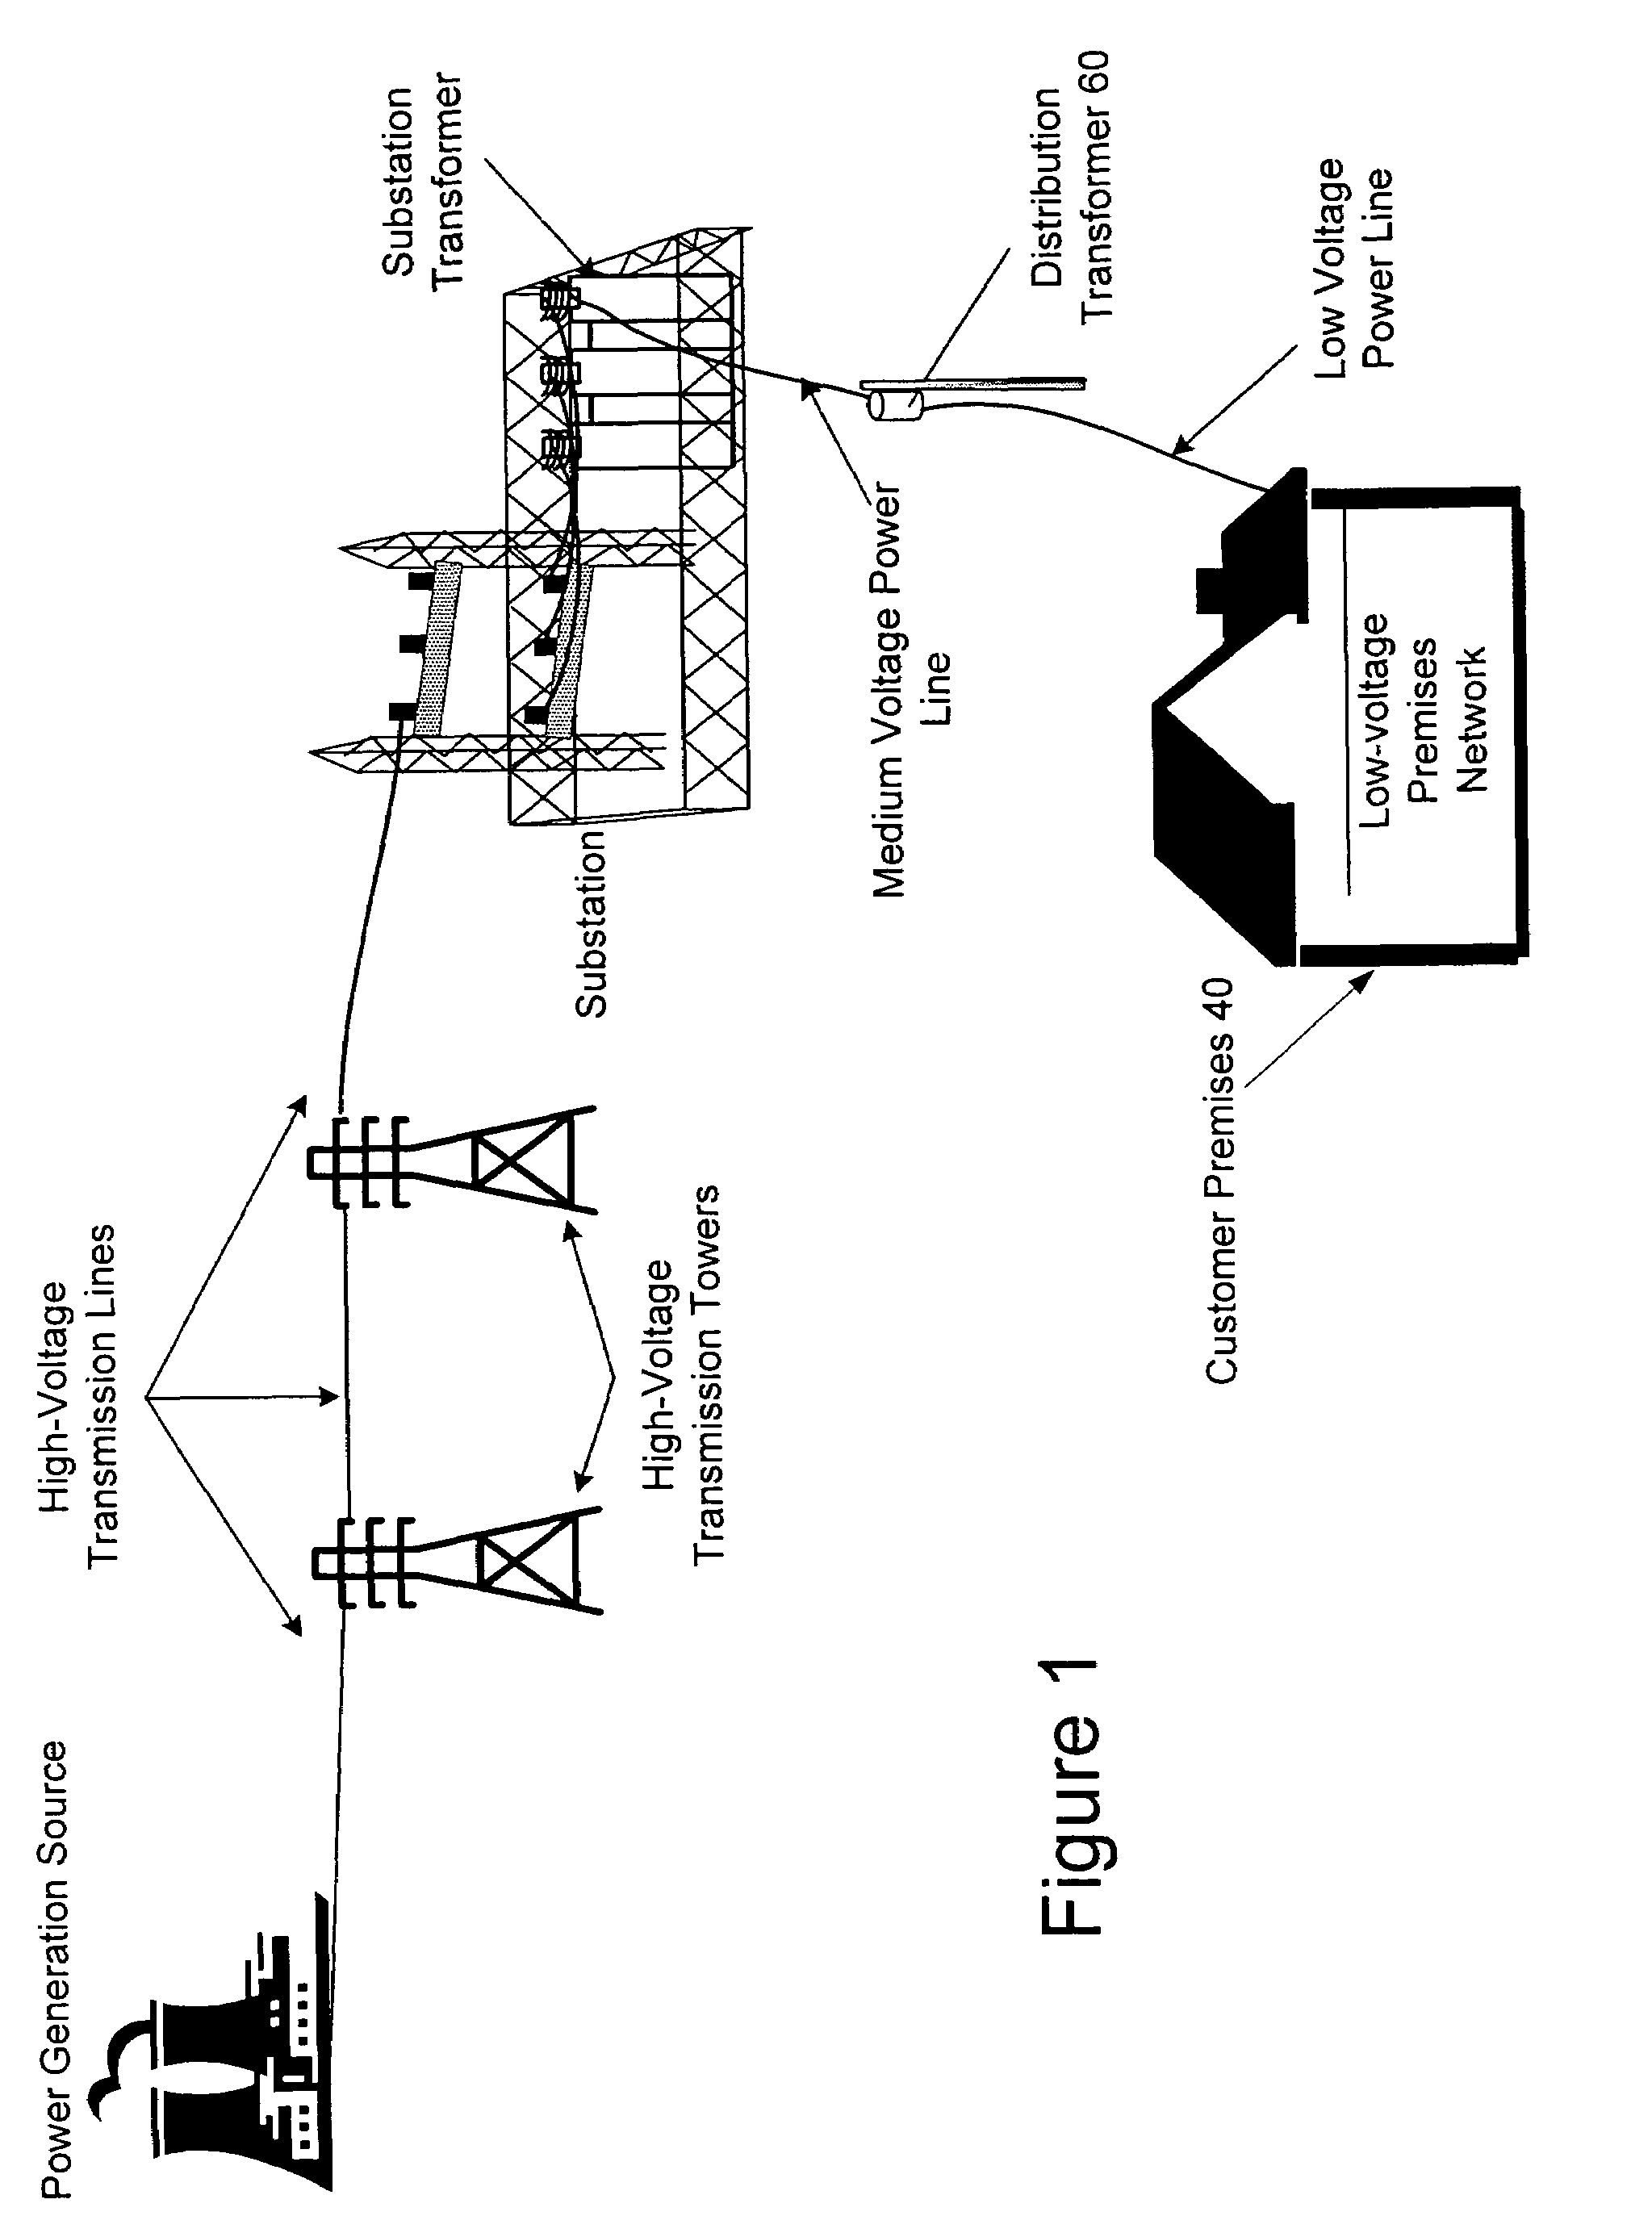 Method and device for amplification of data signals over power lines